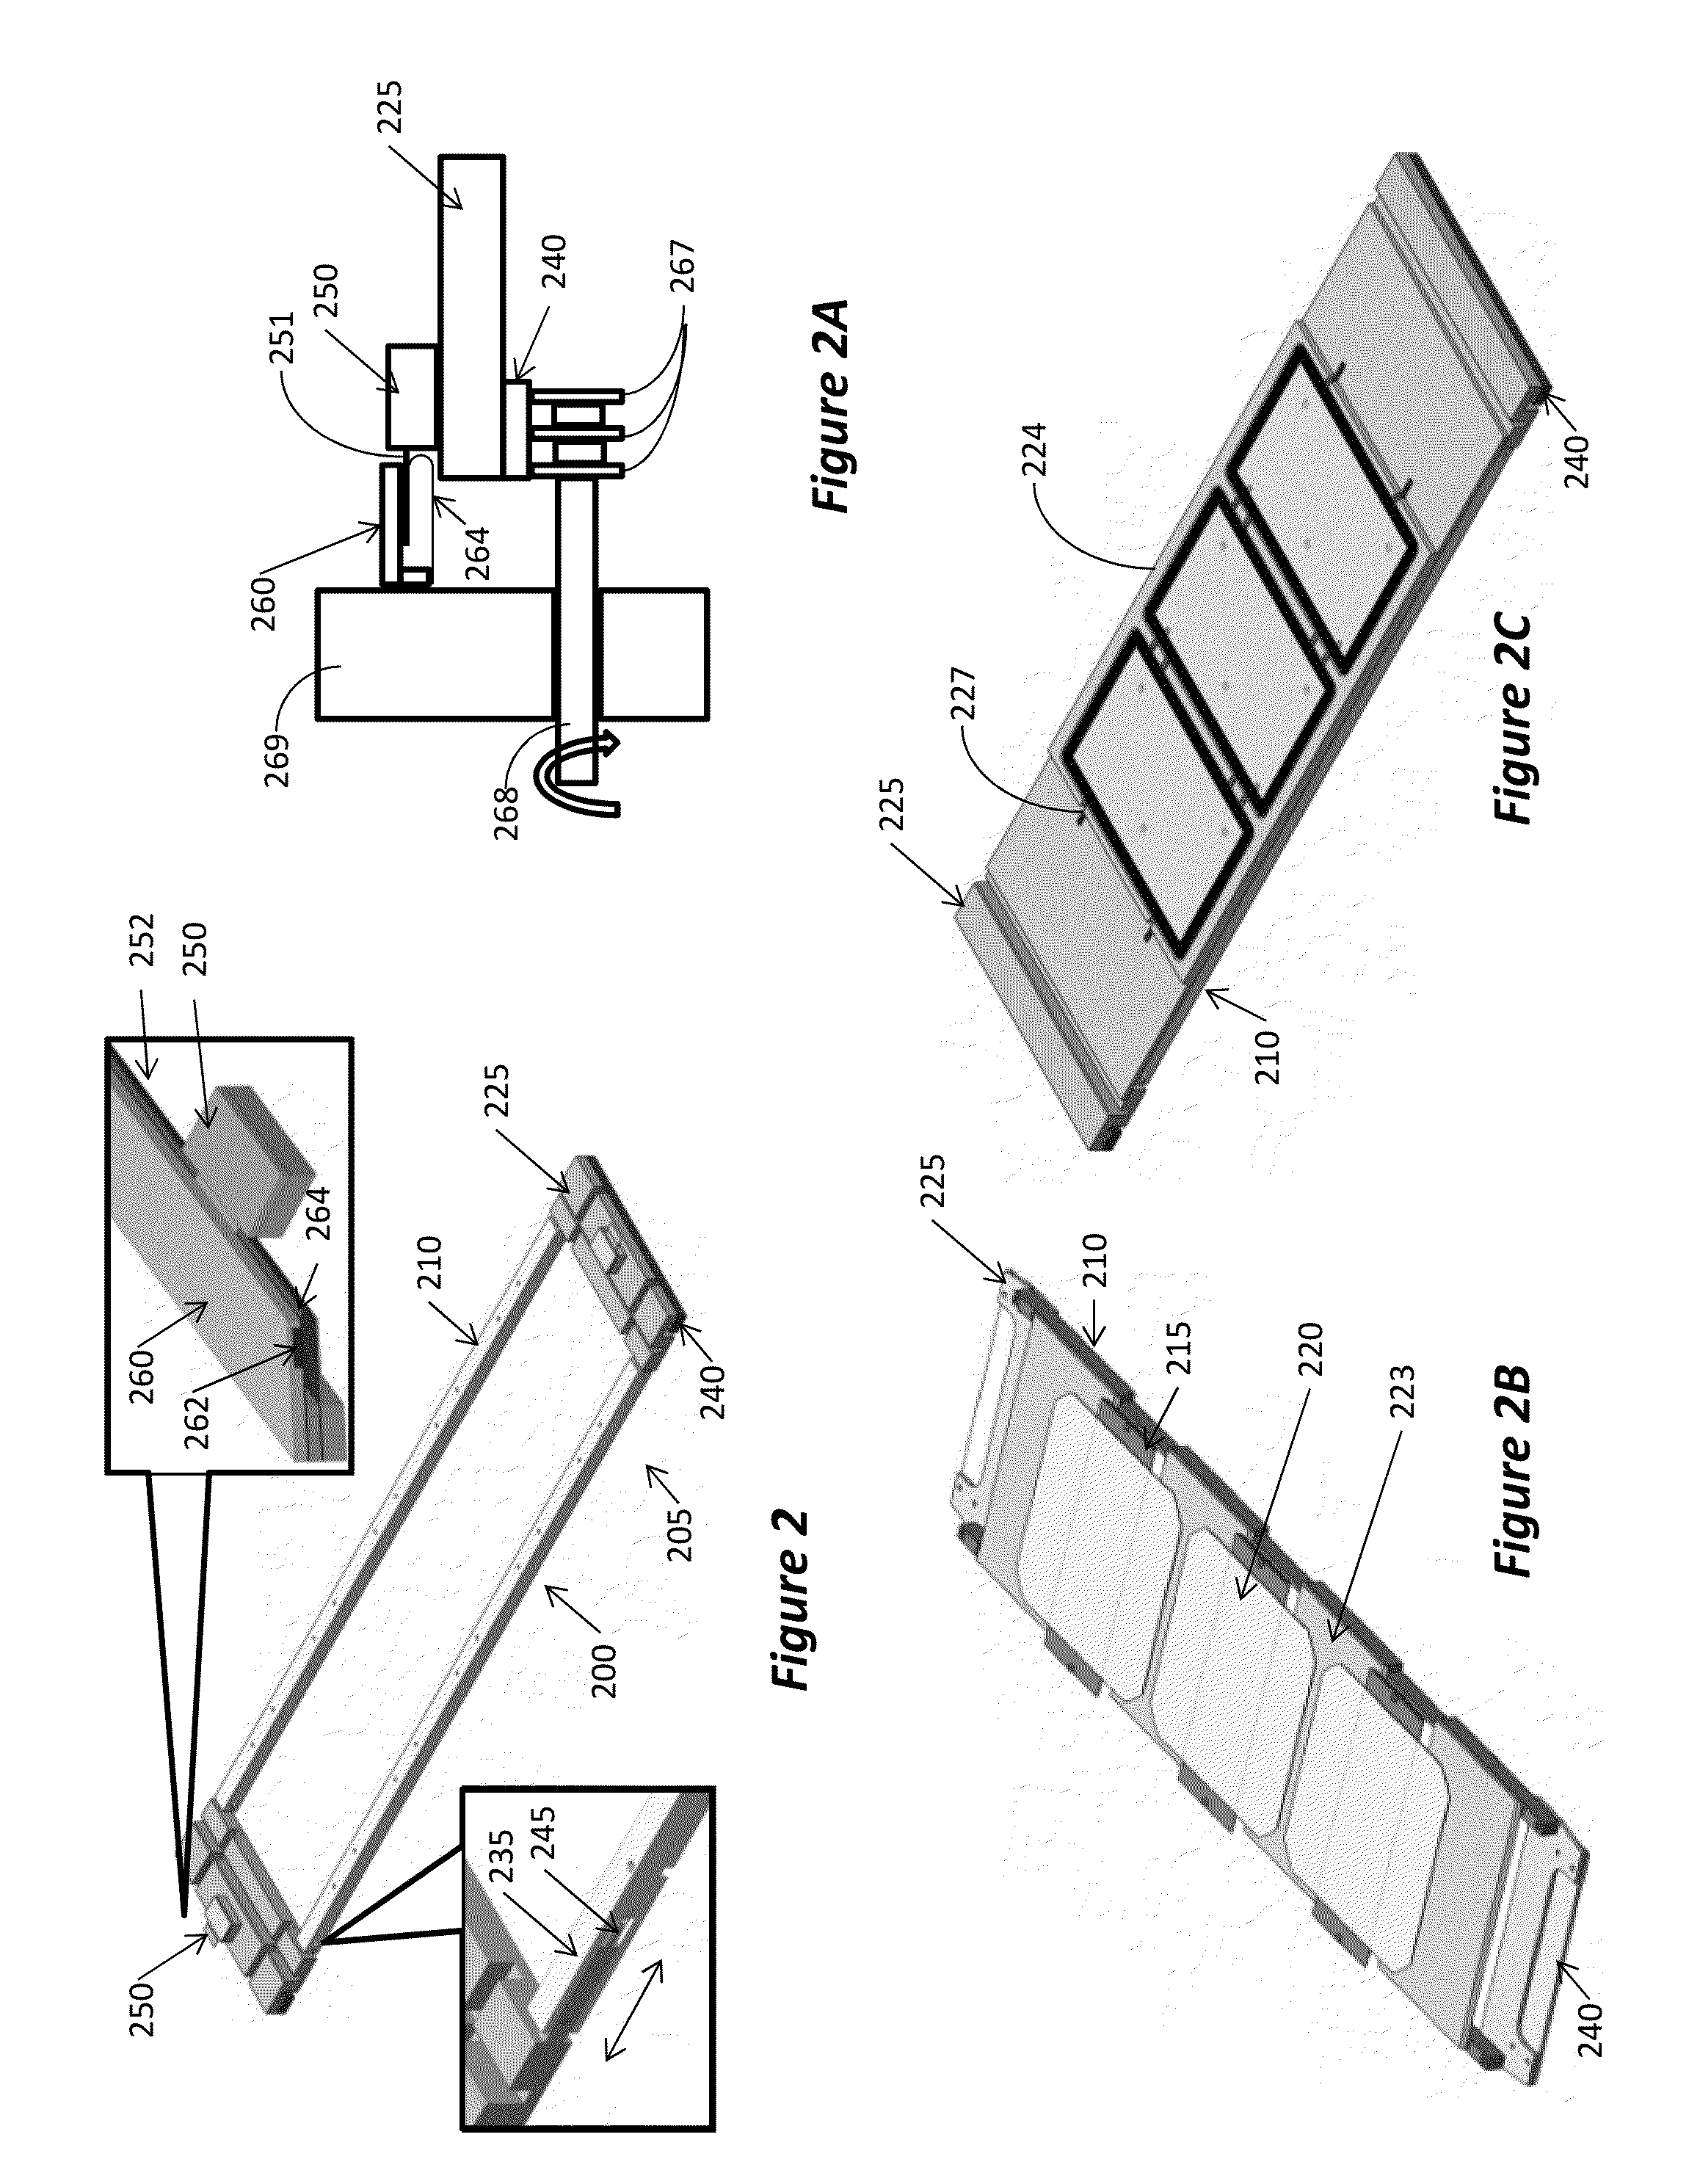 System and method for bi-facial processing of substrates